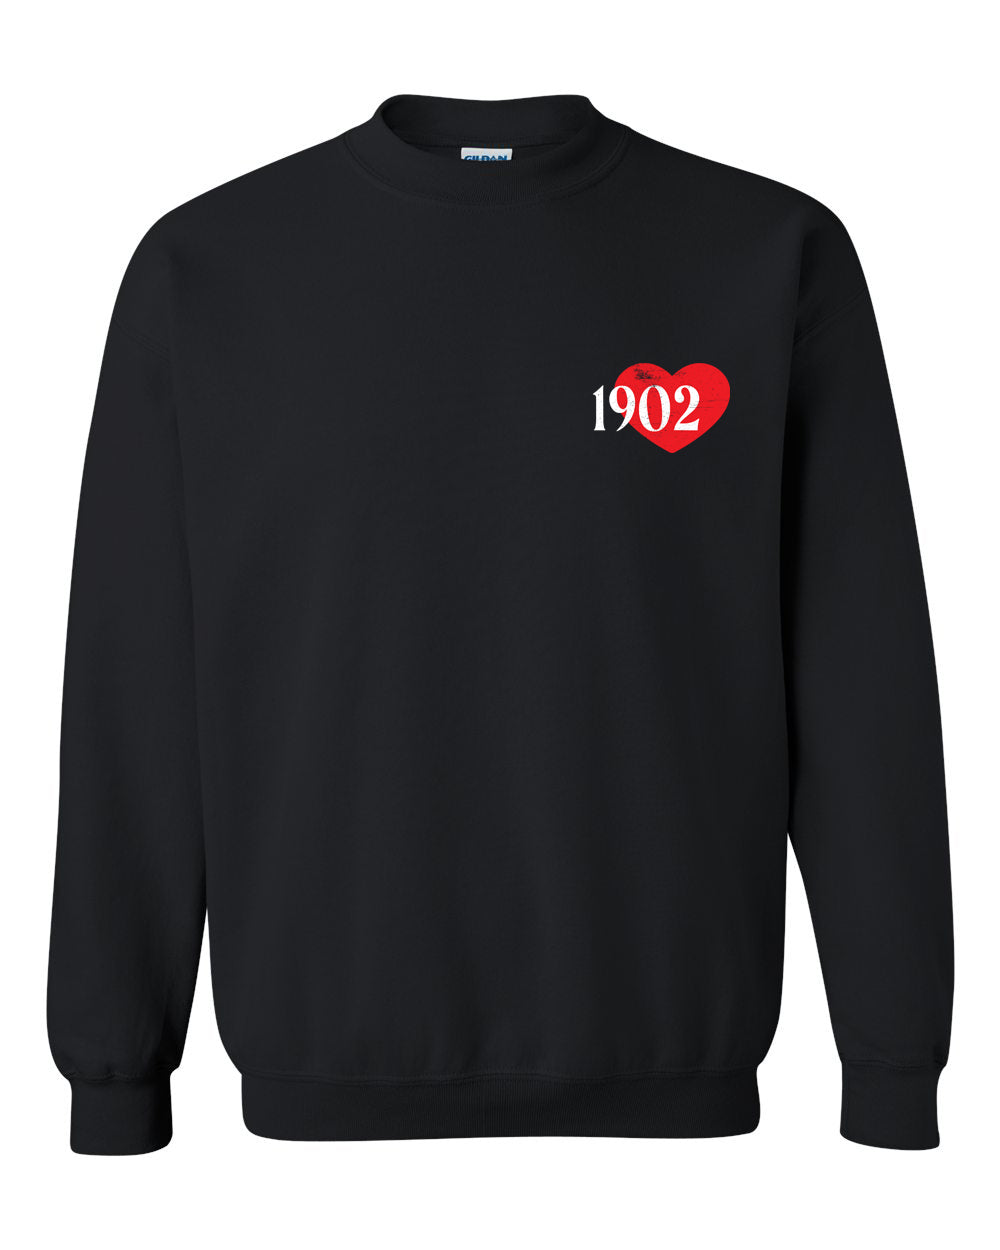 a black sweatshirt with a red heart on it